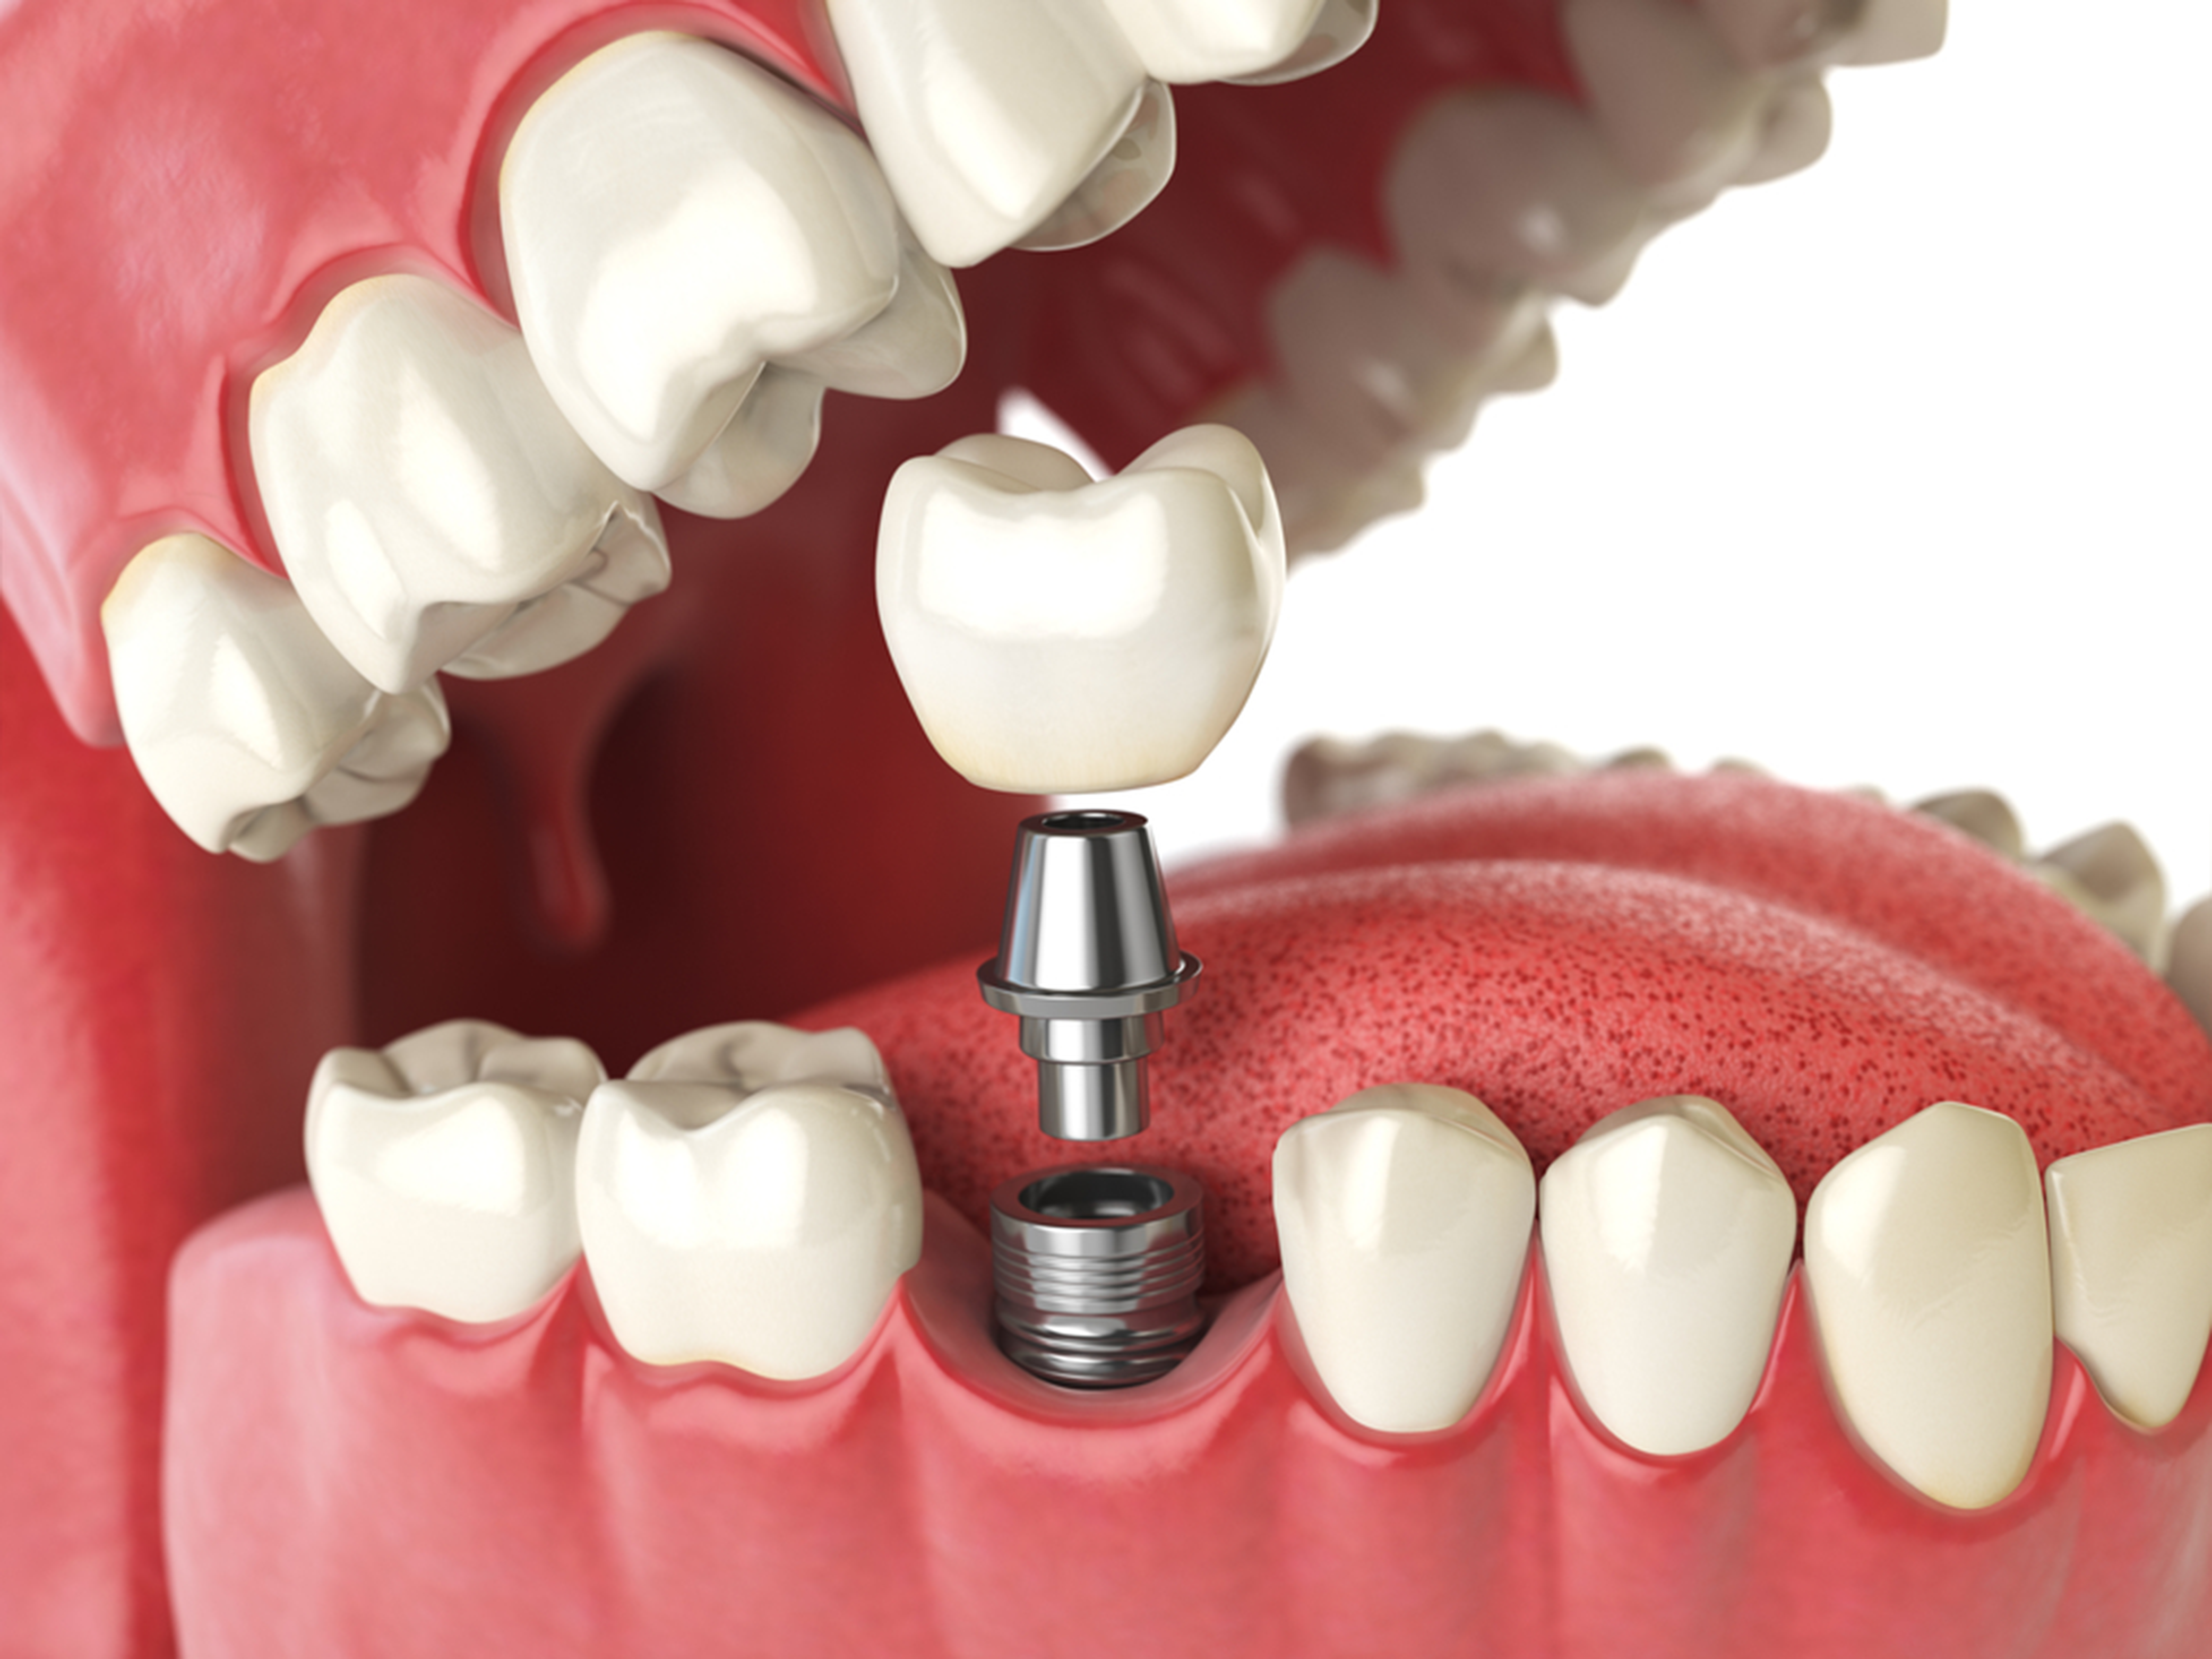 how much does a dental implant cost in canada